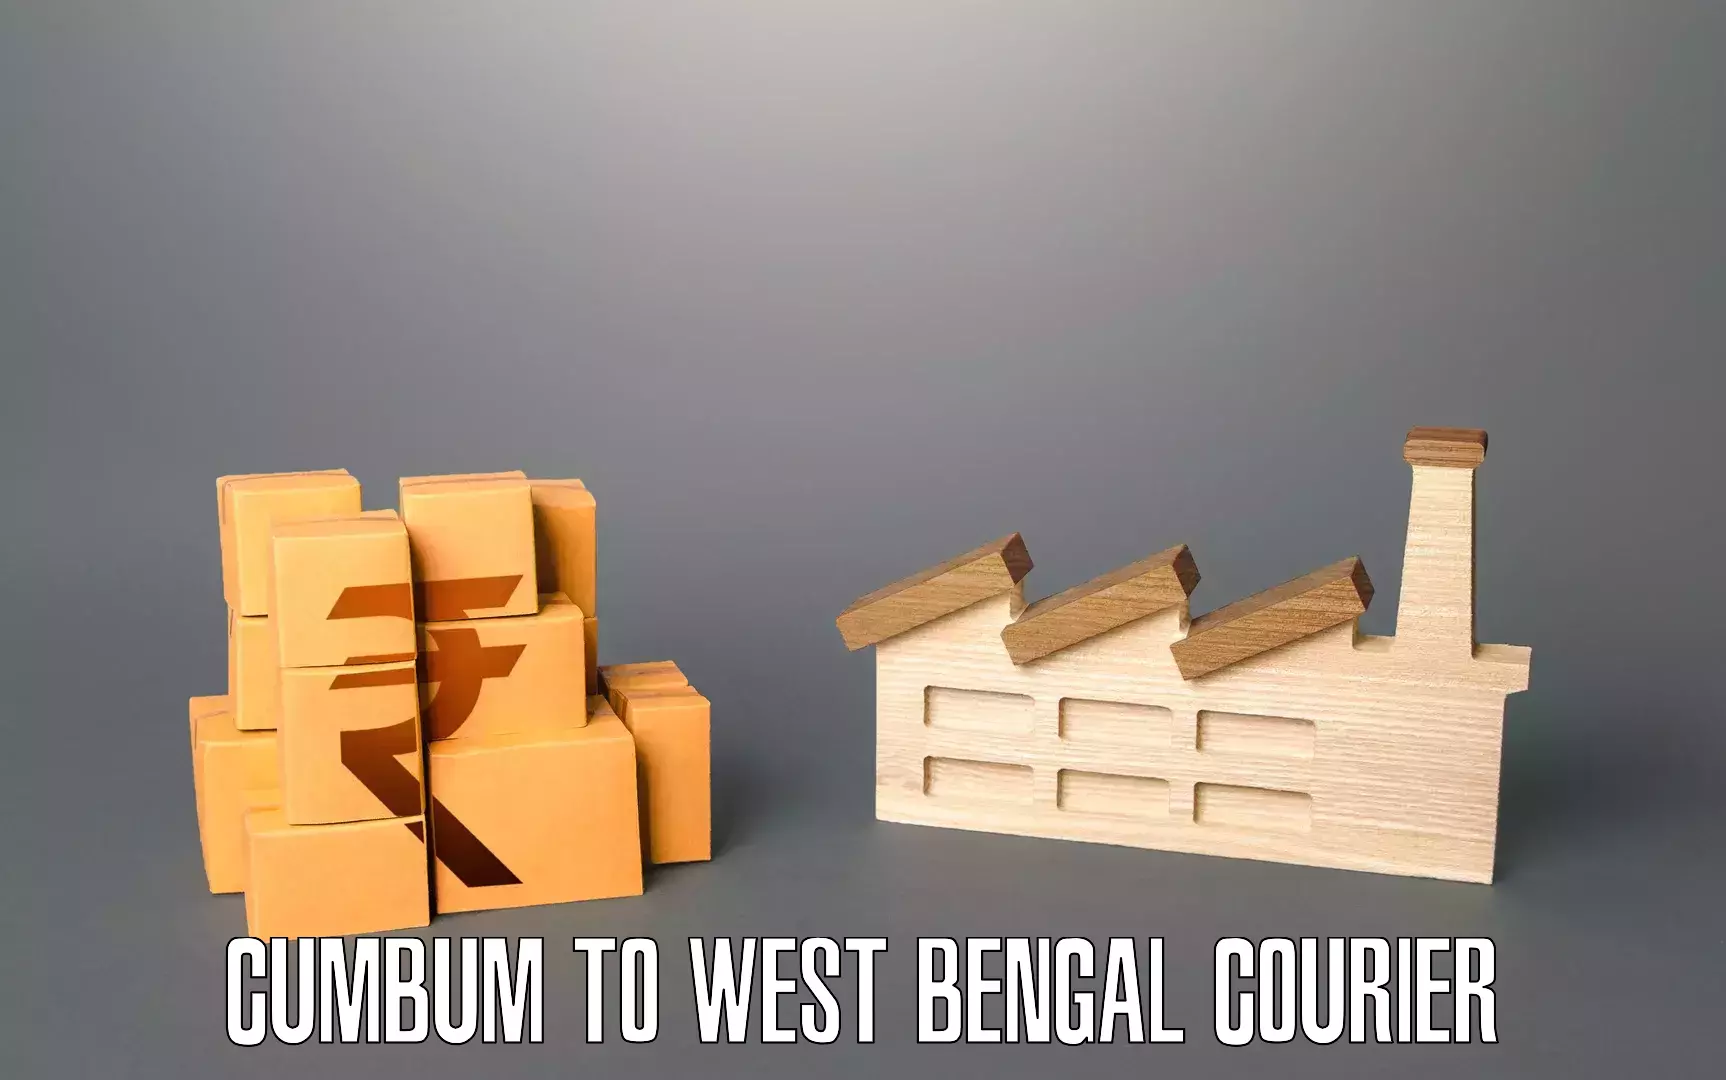 Furniture delivery service in Cumbum to West Bengal